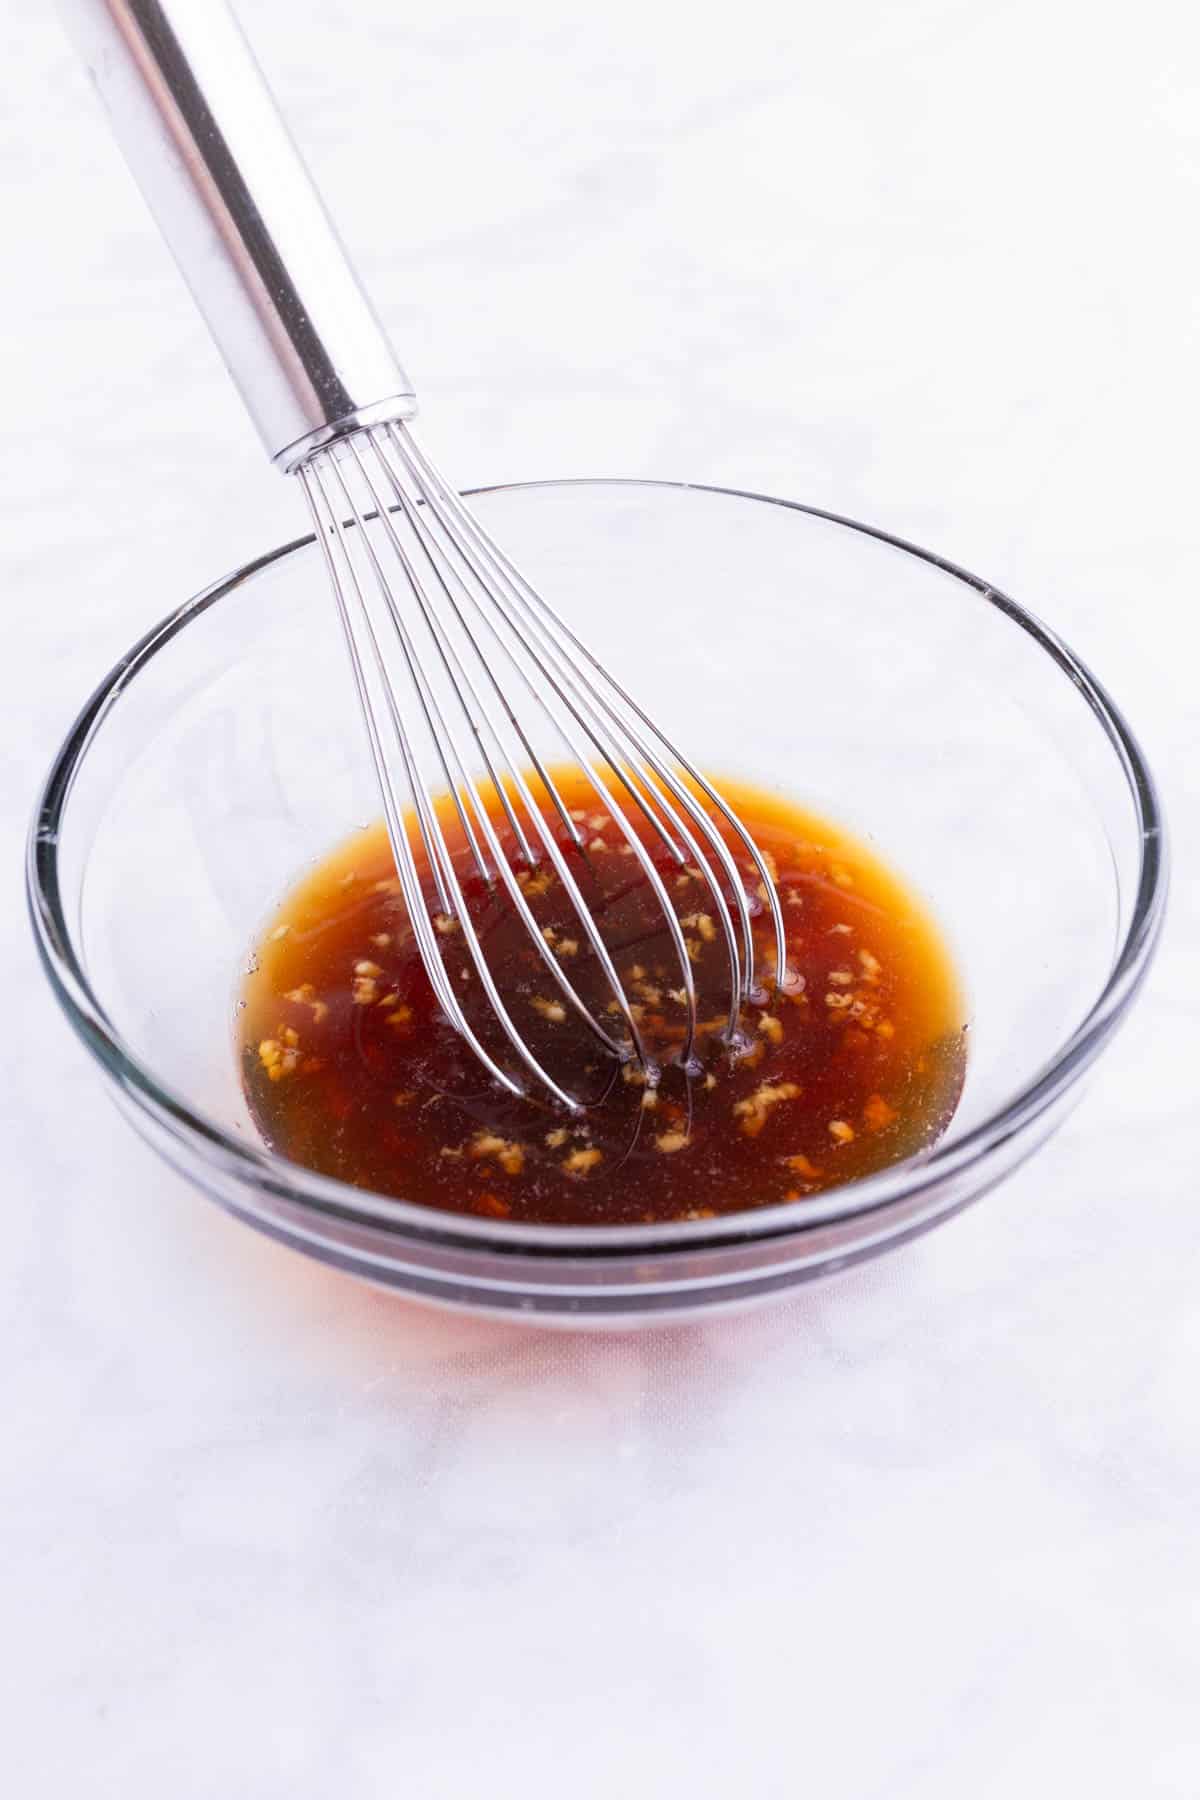 Fish sauce is whisked together in a glass bowl.